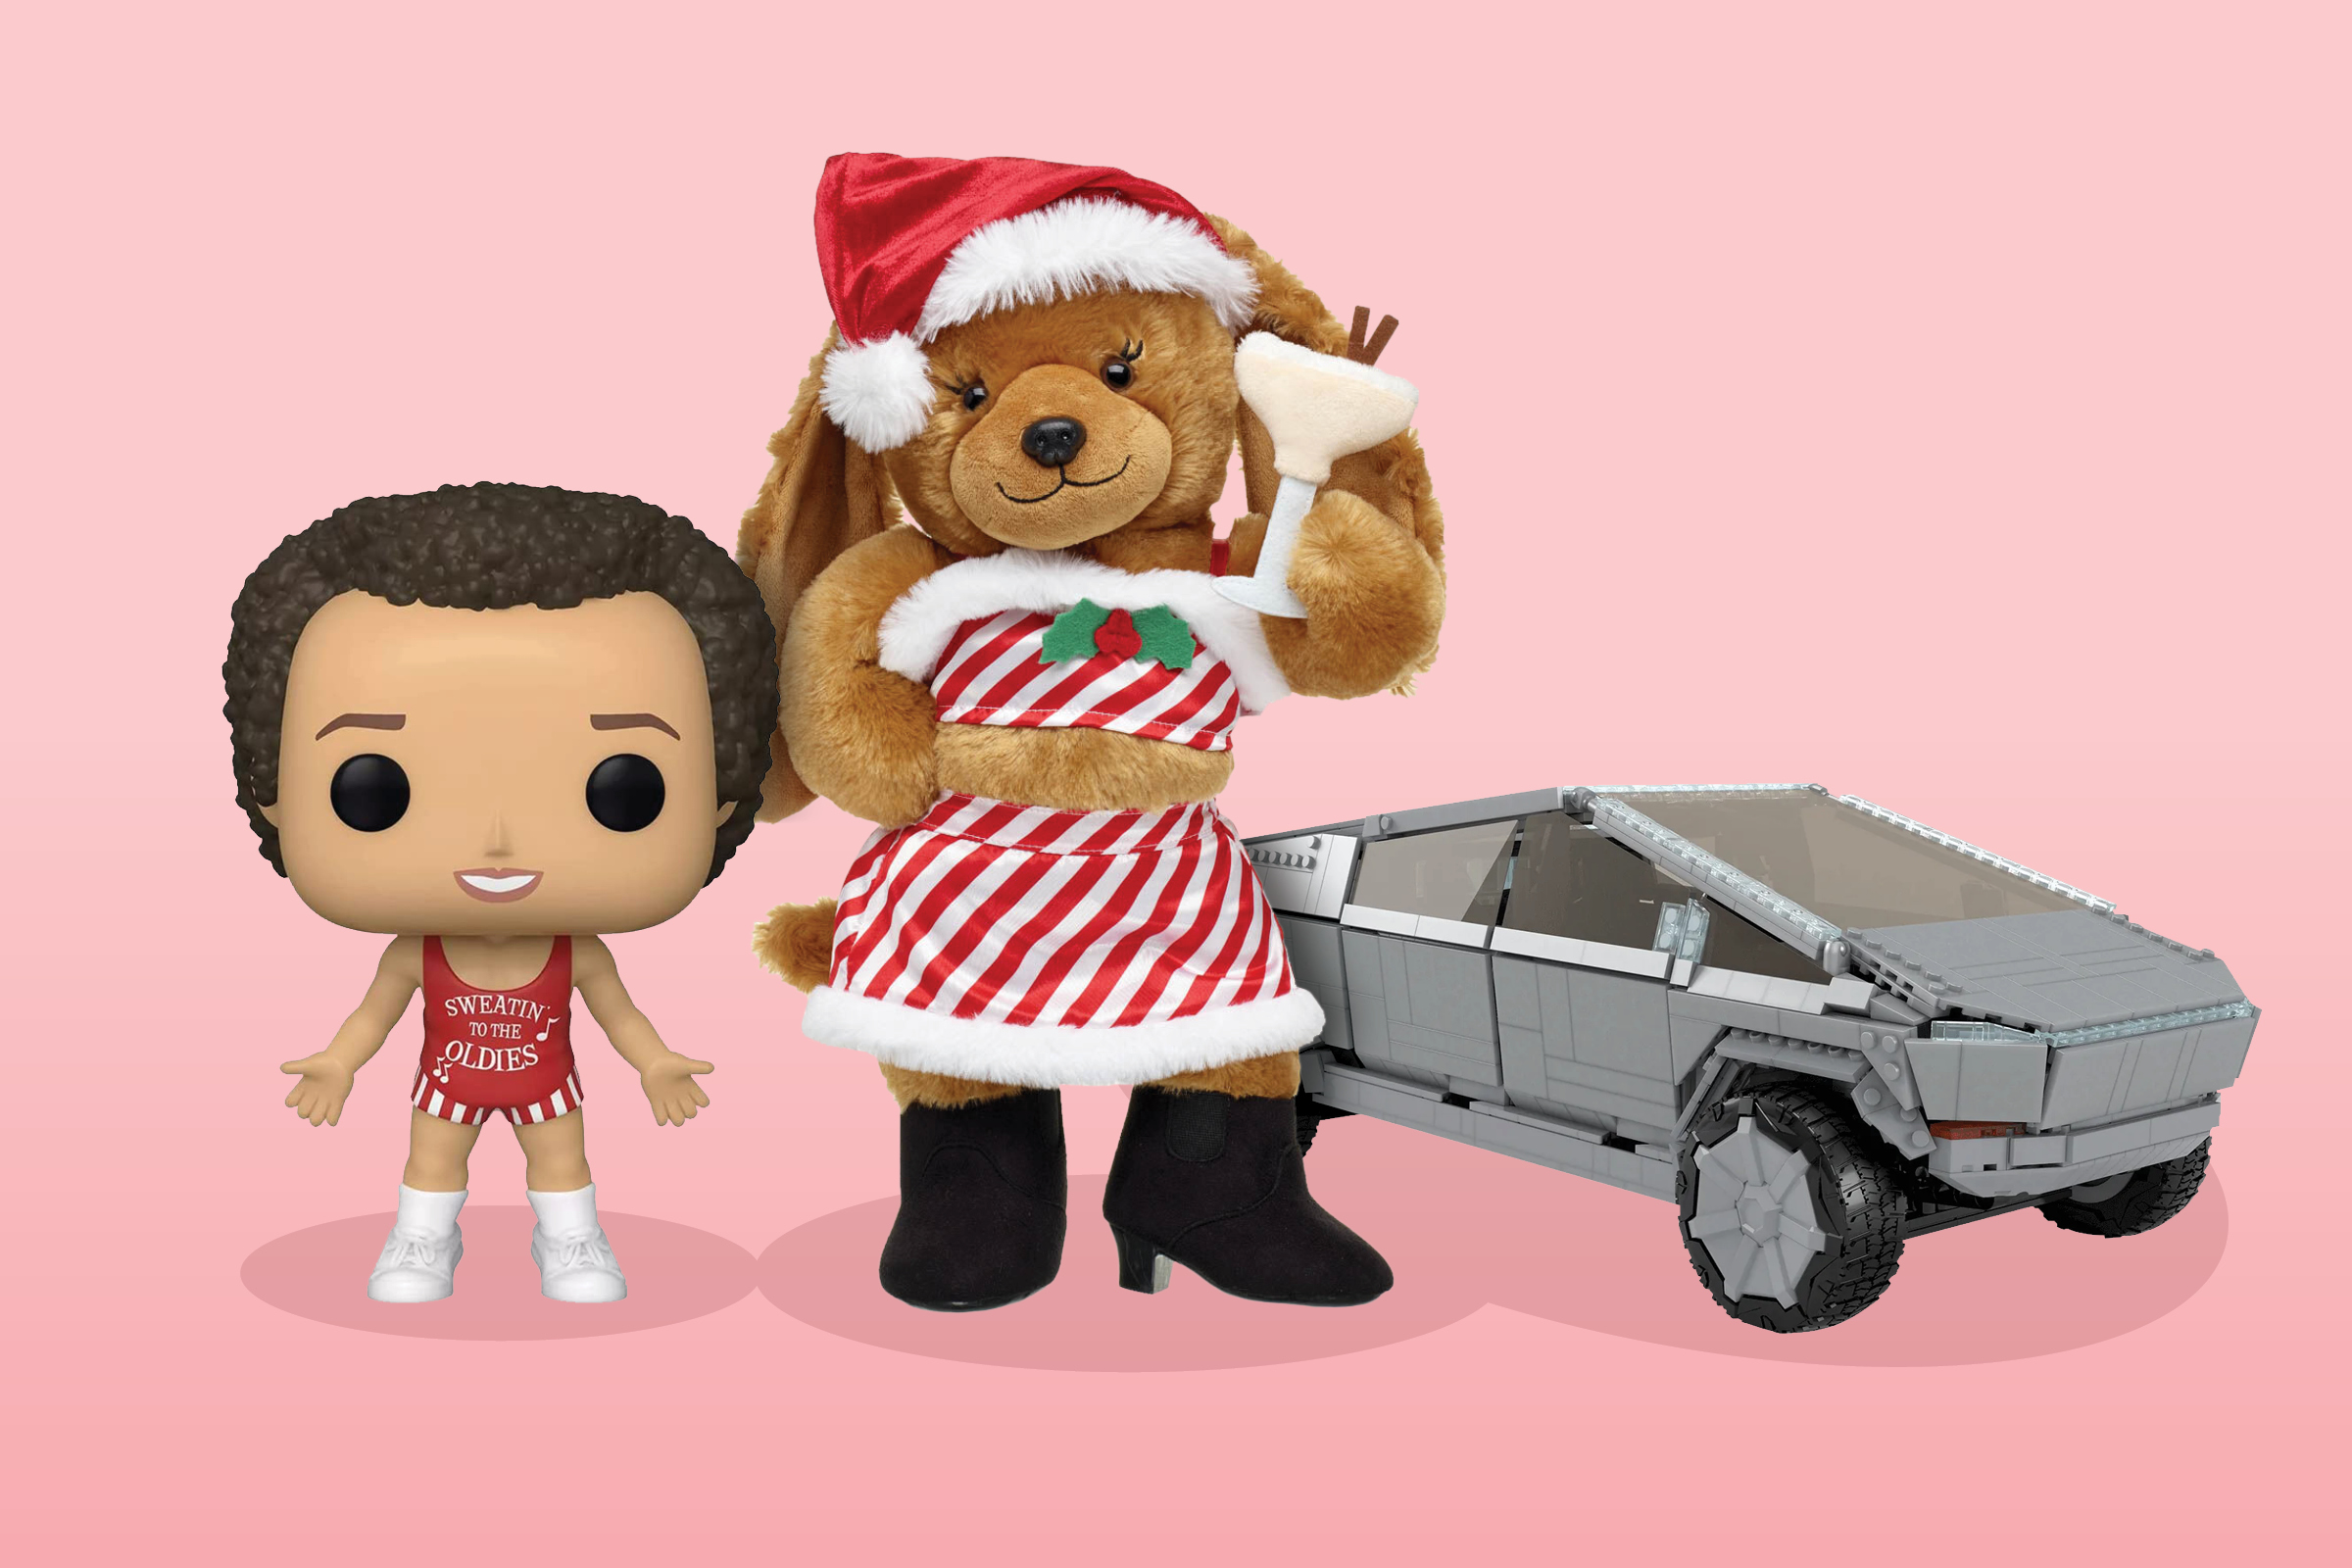 A Richard Simmons Funko Pop, a Build-a-Bear "After Dark" stuffed animal, and the Mattel Creations Tesla Cybertruck (Photo Illustration by Rich Morgan for TIME)